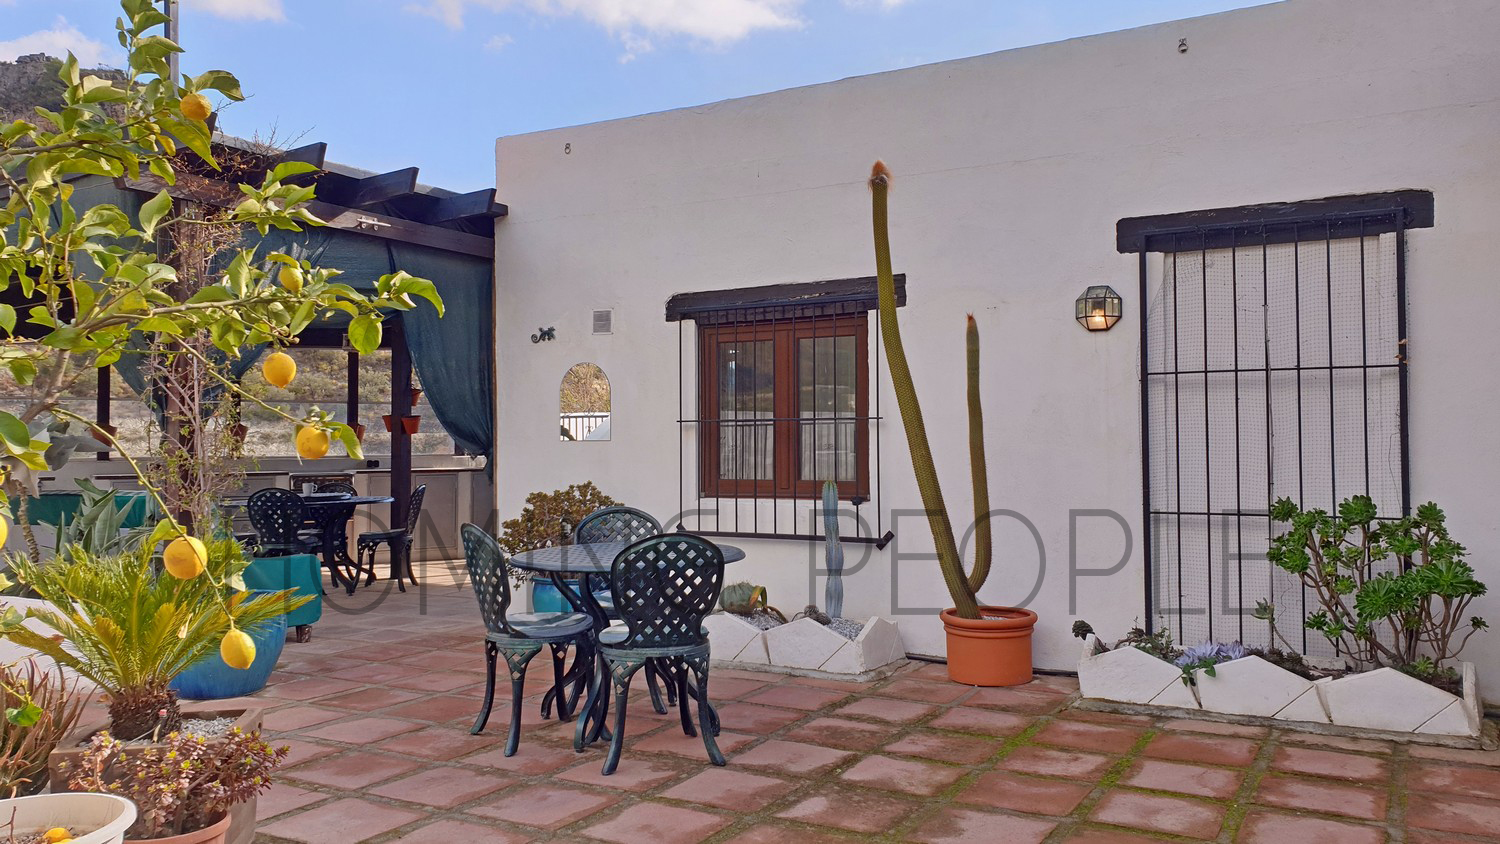 RENTED OUT! A charming cortijo with panoramic, mountain views